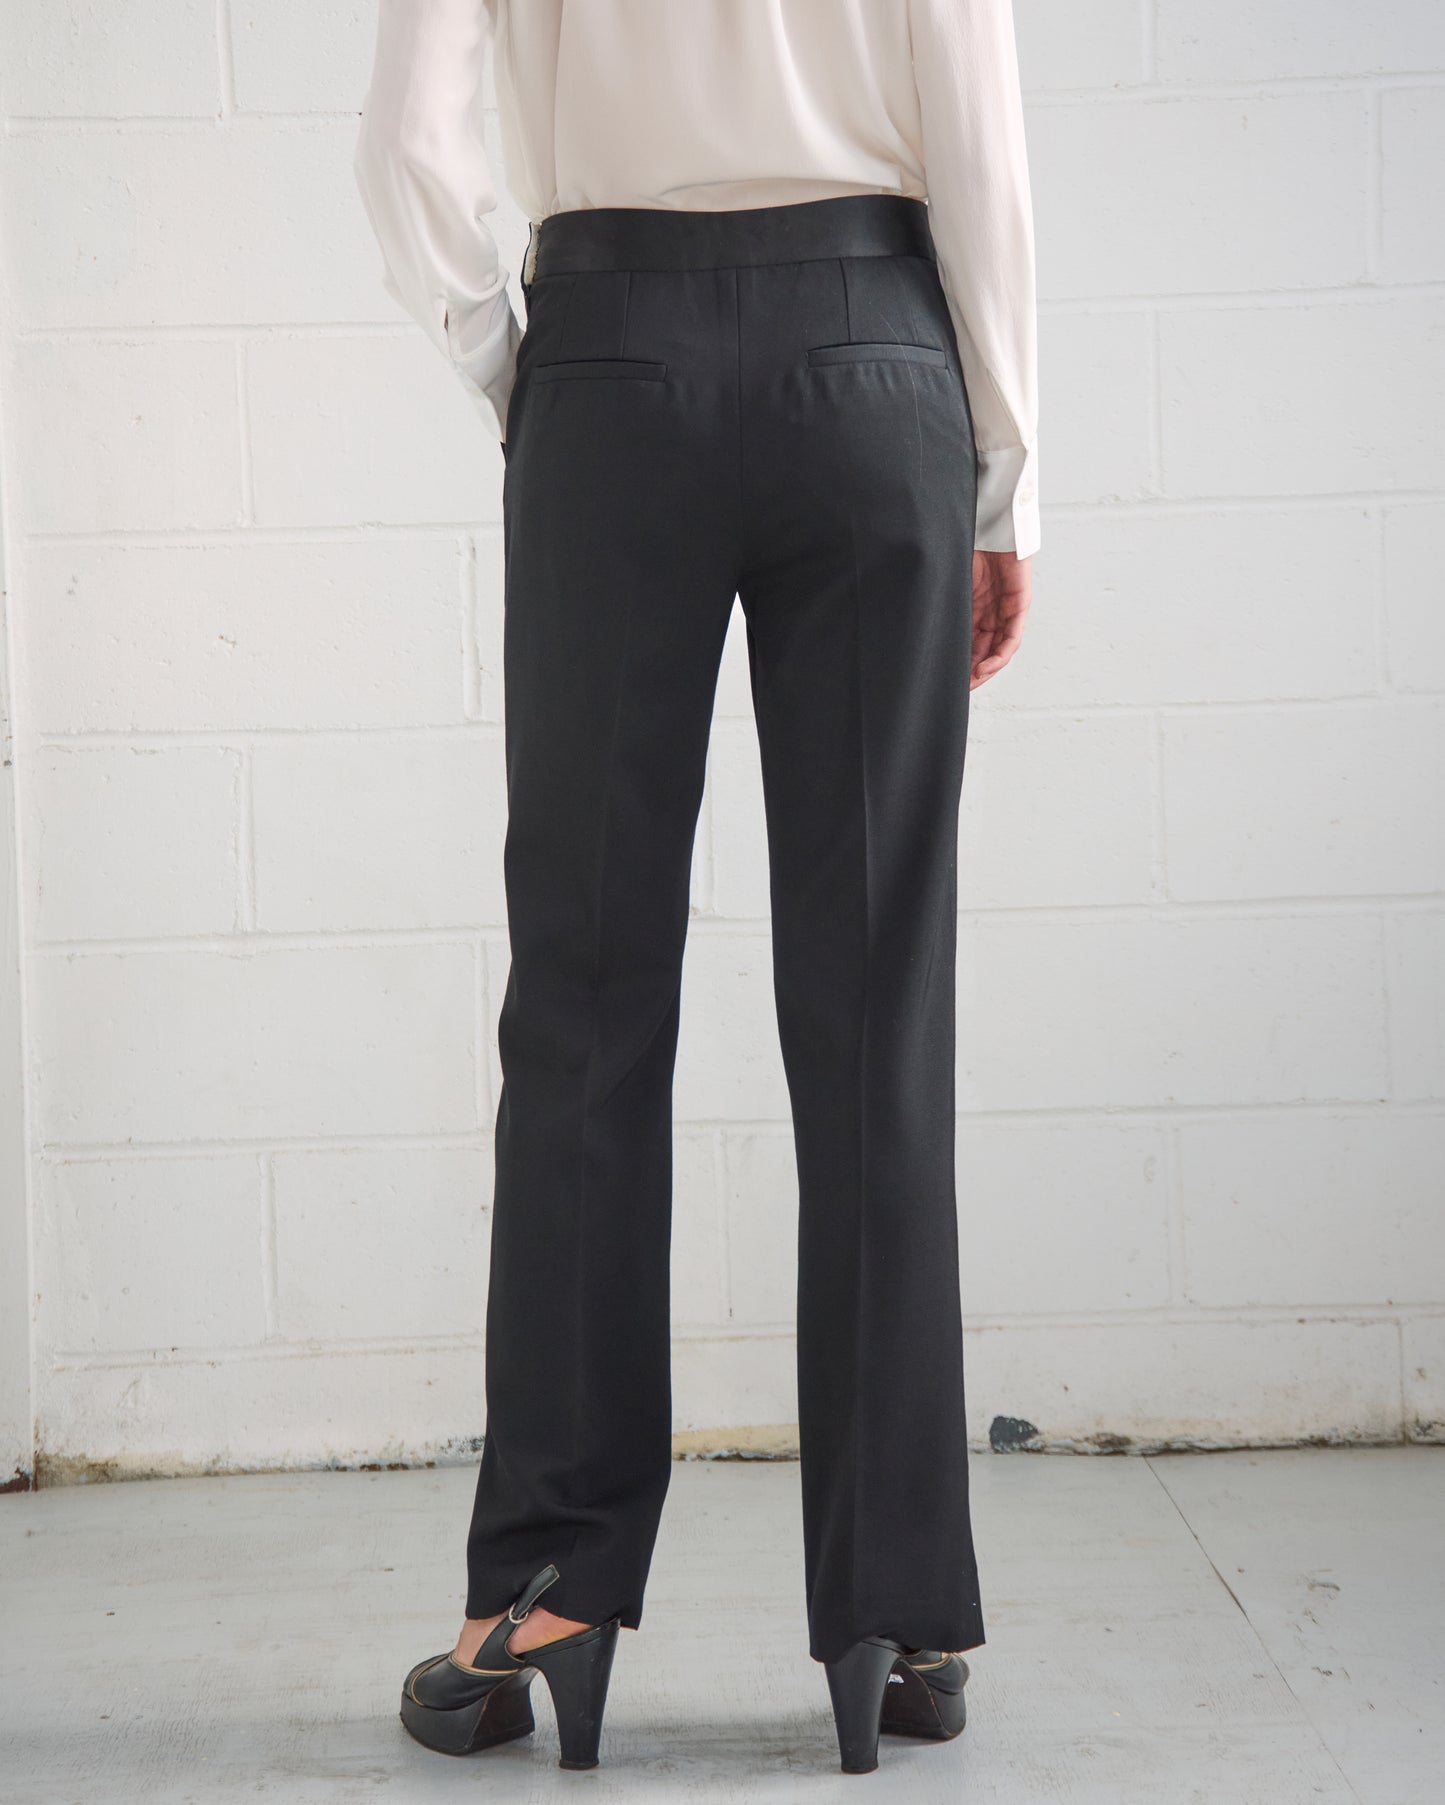 The Bianca Trouser